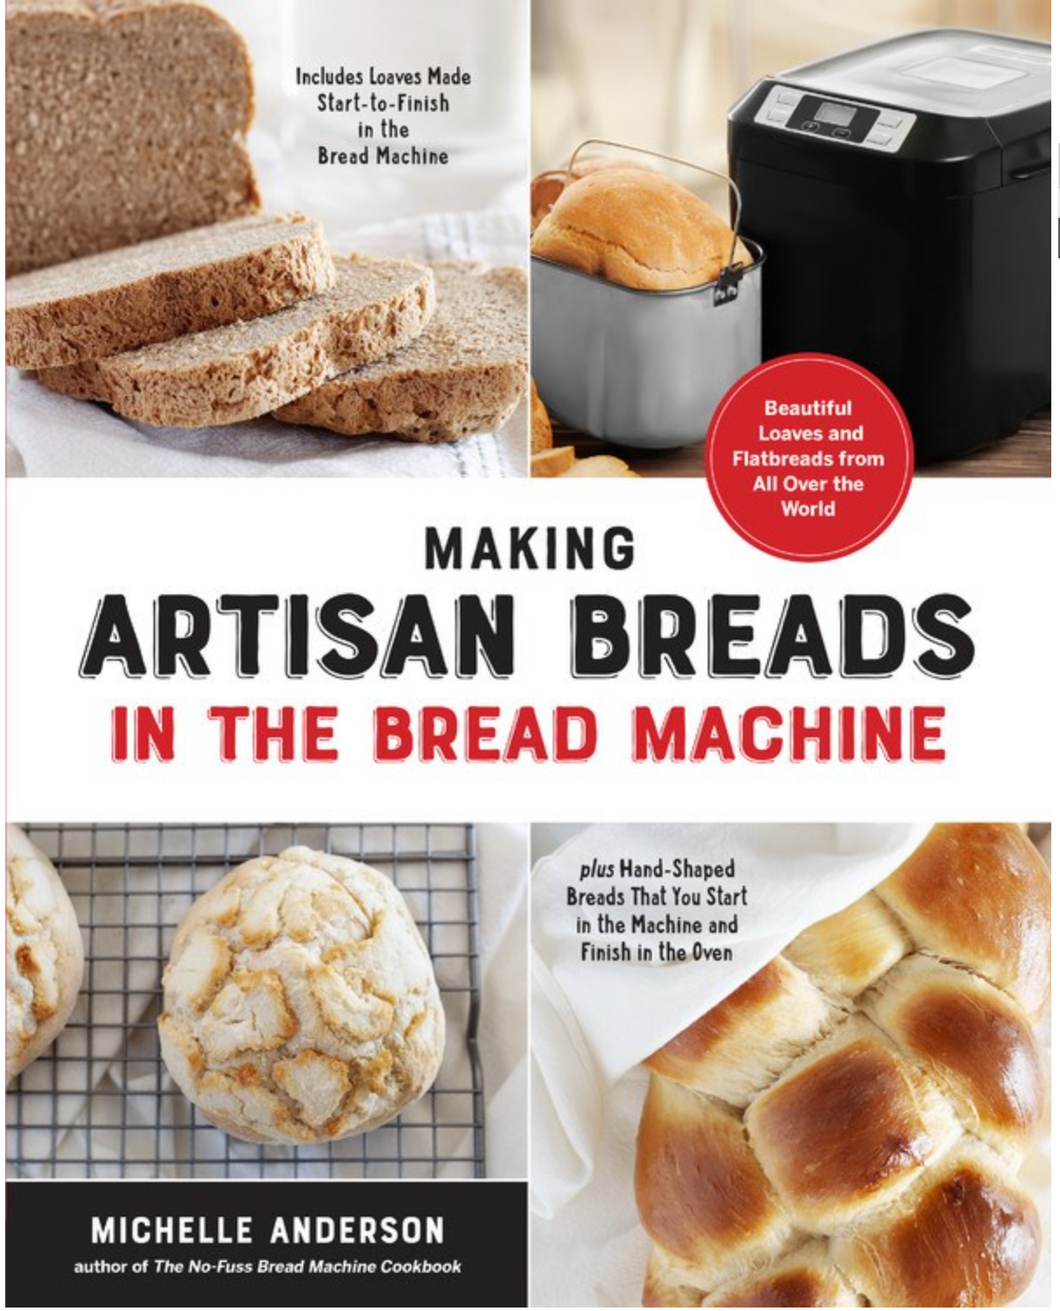 Making Artisan Breads in the Bread Machine